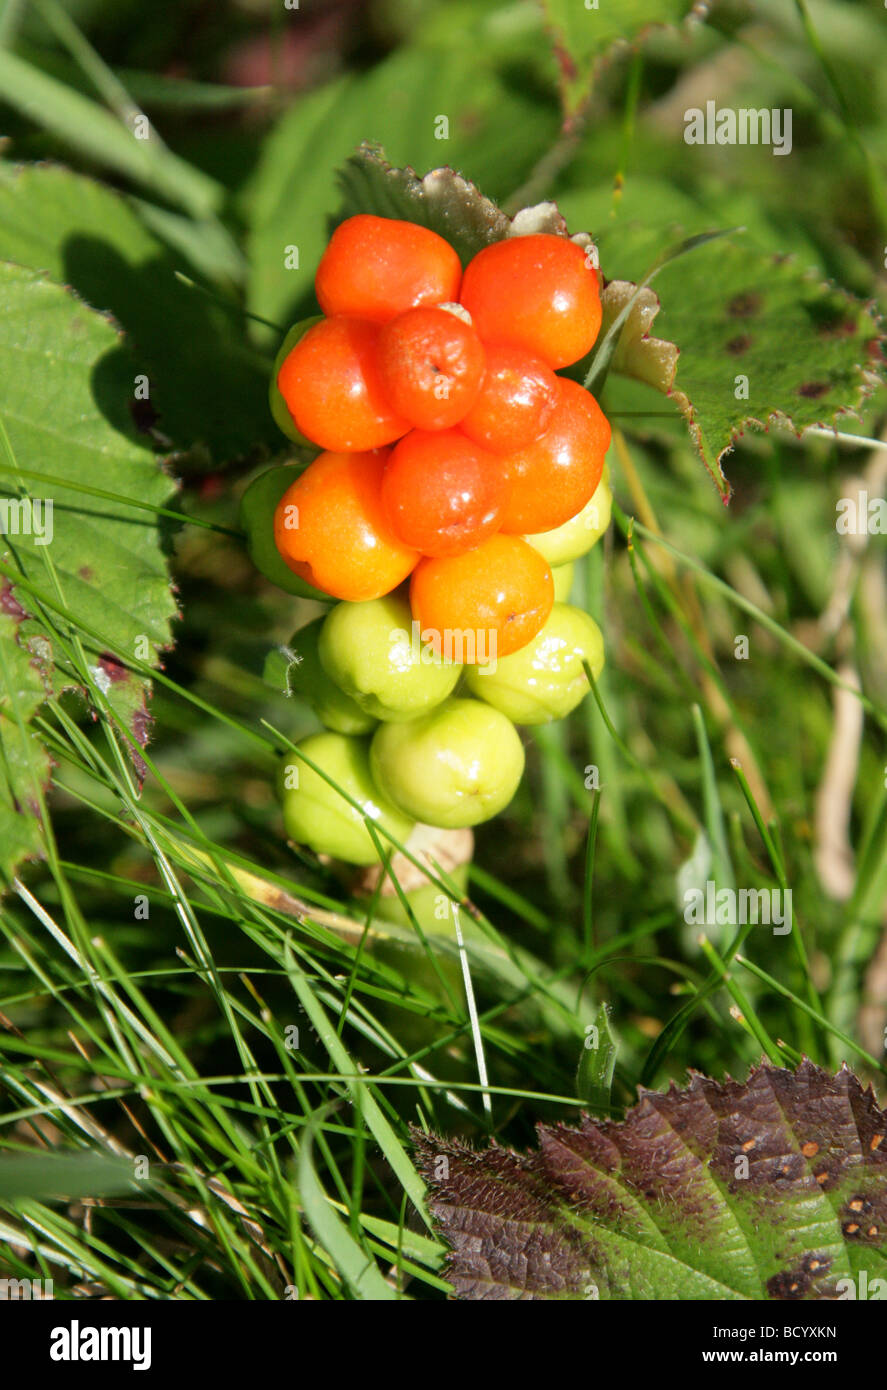 Cuckoo Pint, Arum maculatum, Araceae. Also Known as Lords and Ladies, Cuckoo Pintle and Wake Robin. Stock Photo